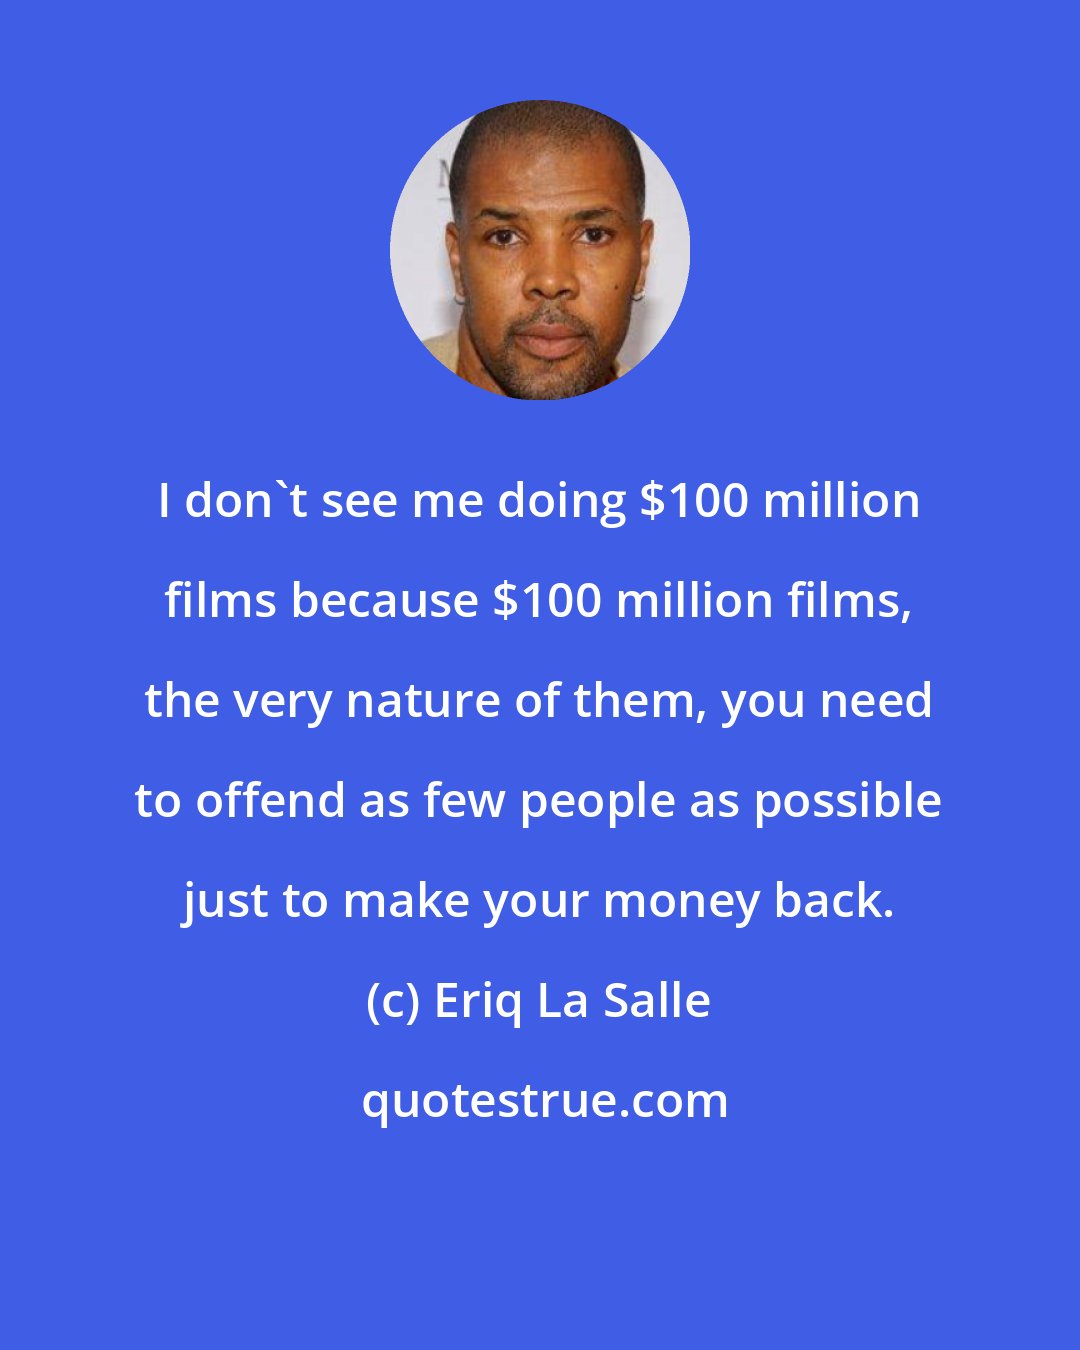 Eriq La Salle: I don't see me doing $100 million films because $100 million films, the very nature of them, you need to offend as few people as possible just to make your money back.